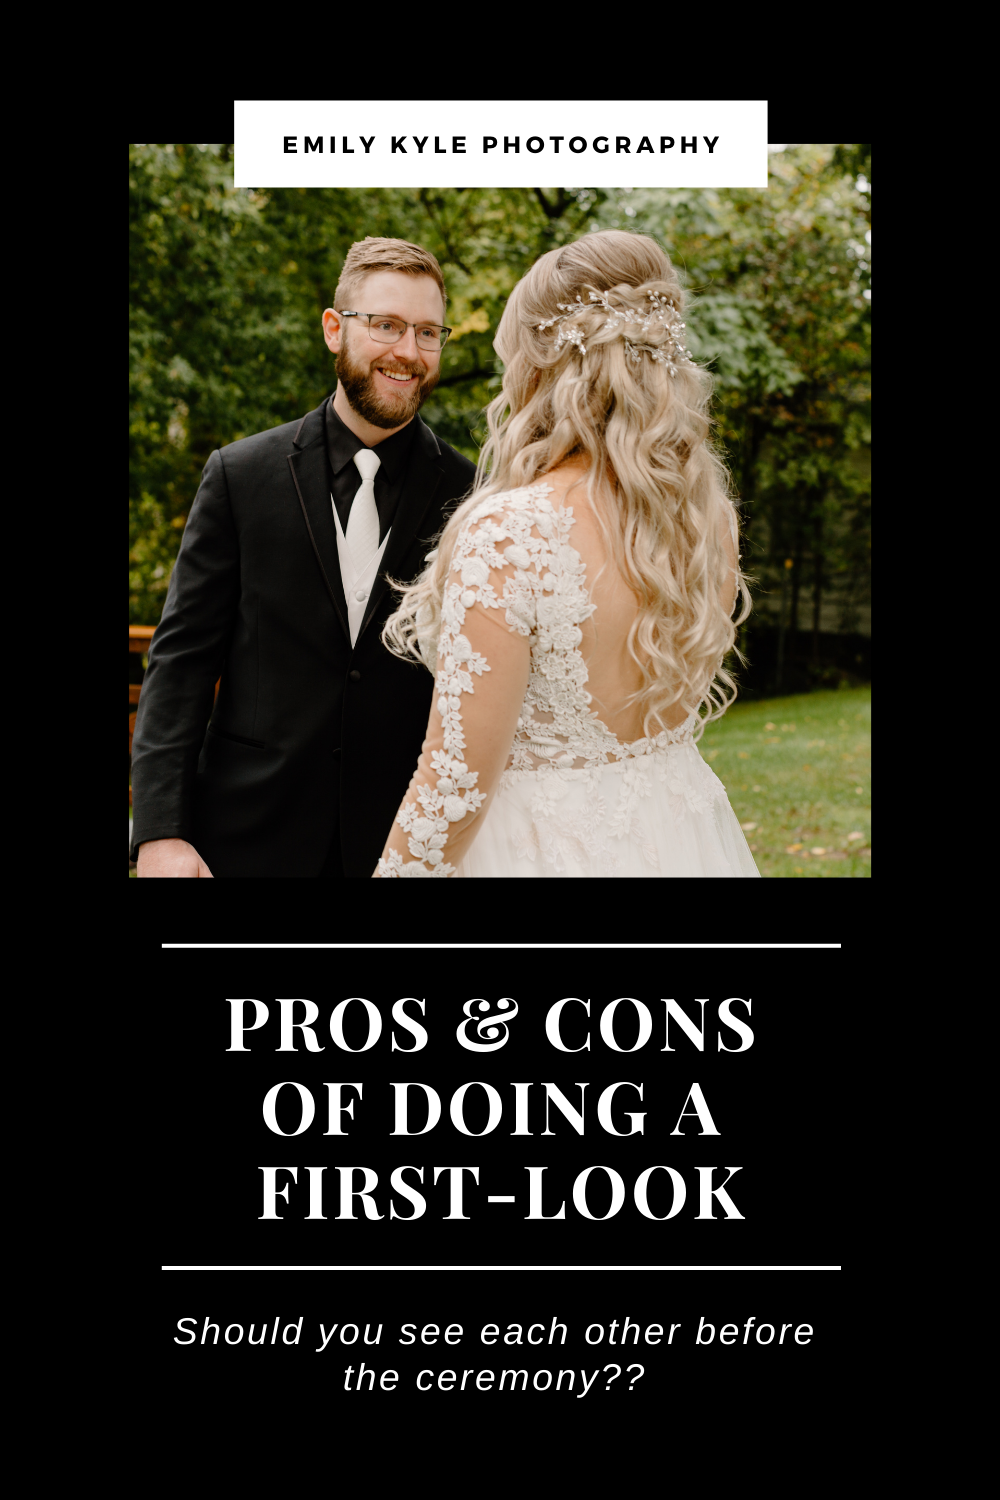 Pros and Cons to doing a first-look on your wedding day blog.